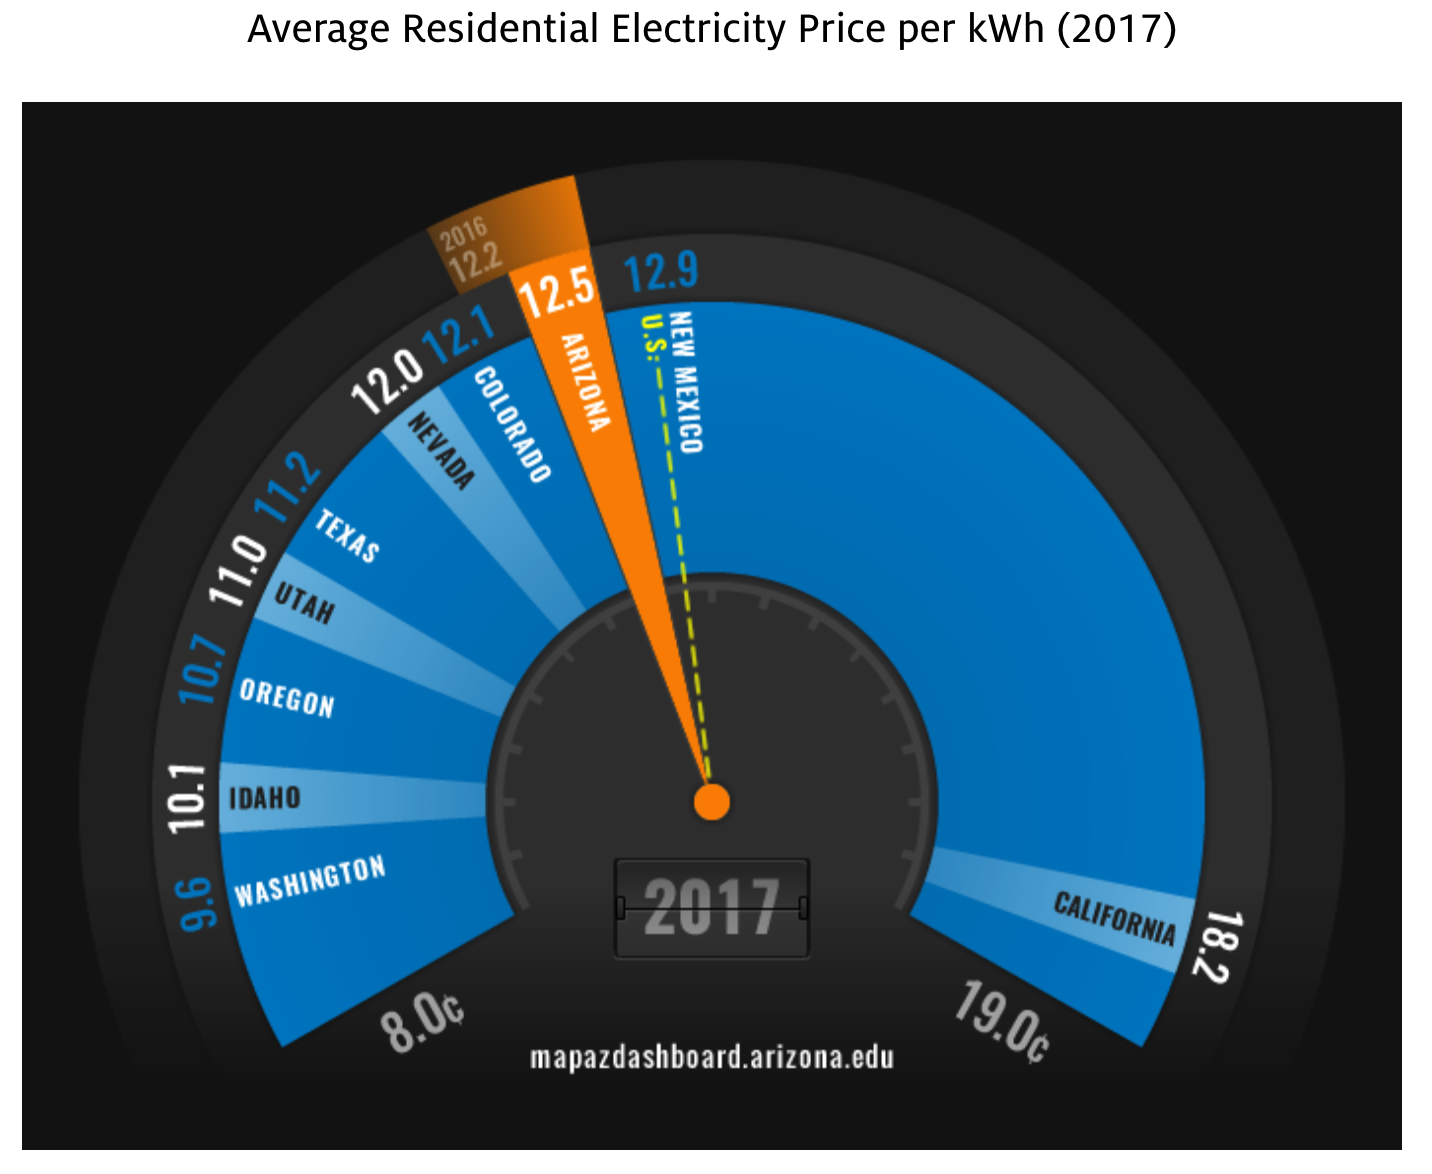 residential electricity prices western states and metros